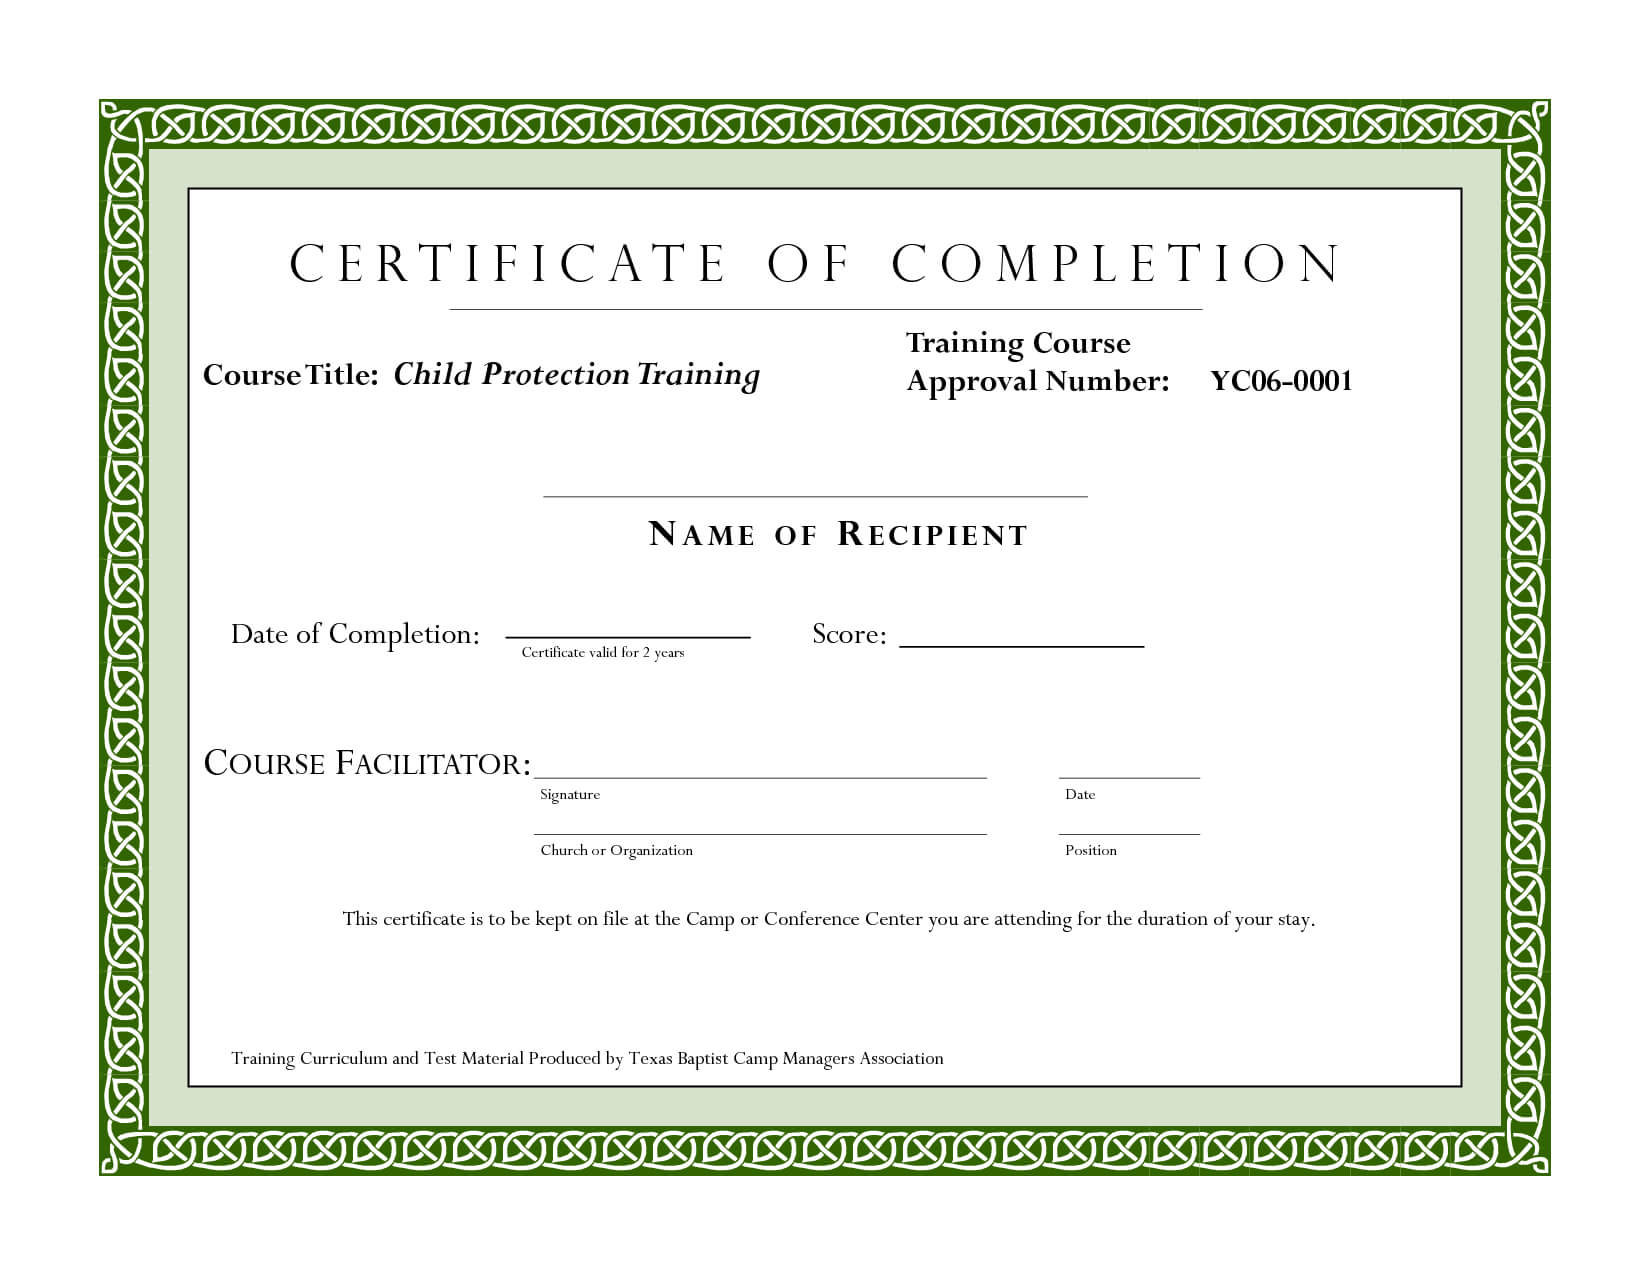 Course Completion Certificate Template | Certificate Of Throughout Template For Training Certificate